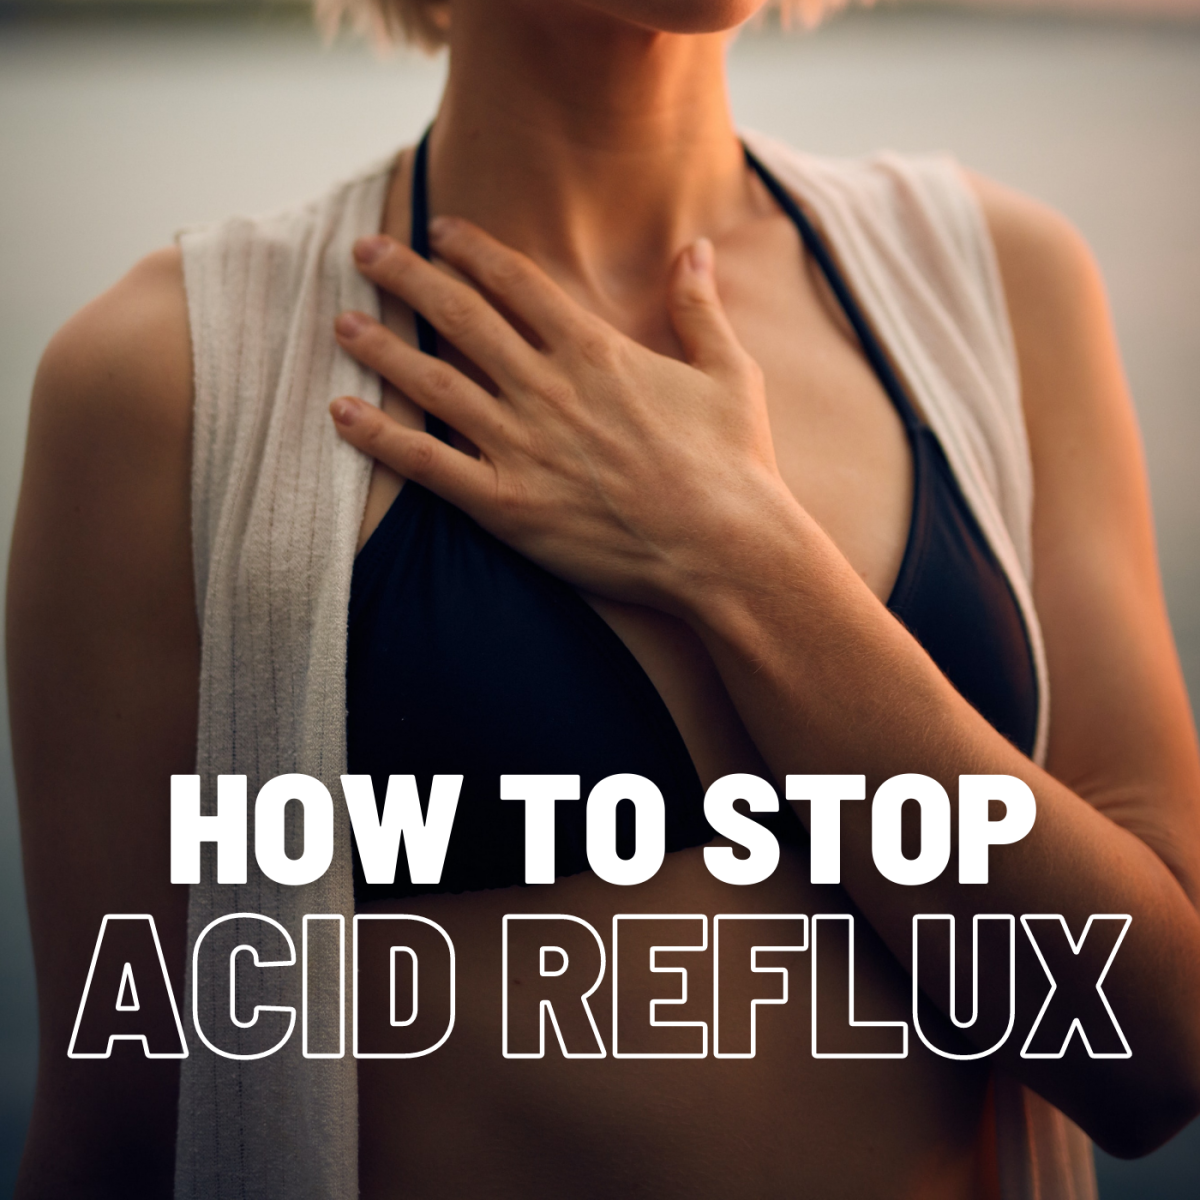 How to identify acid reflux and start feeling better.